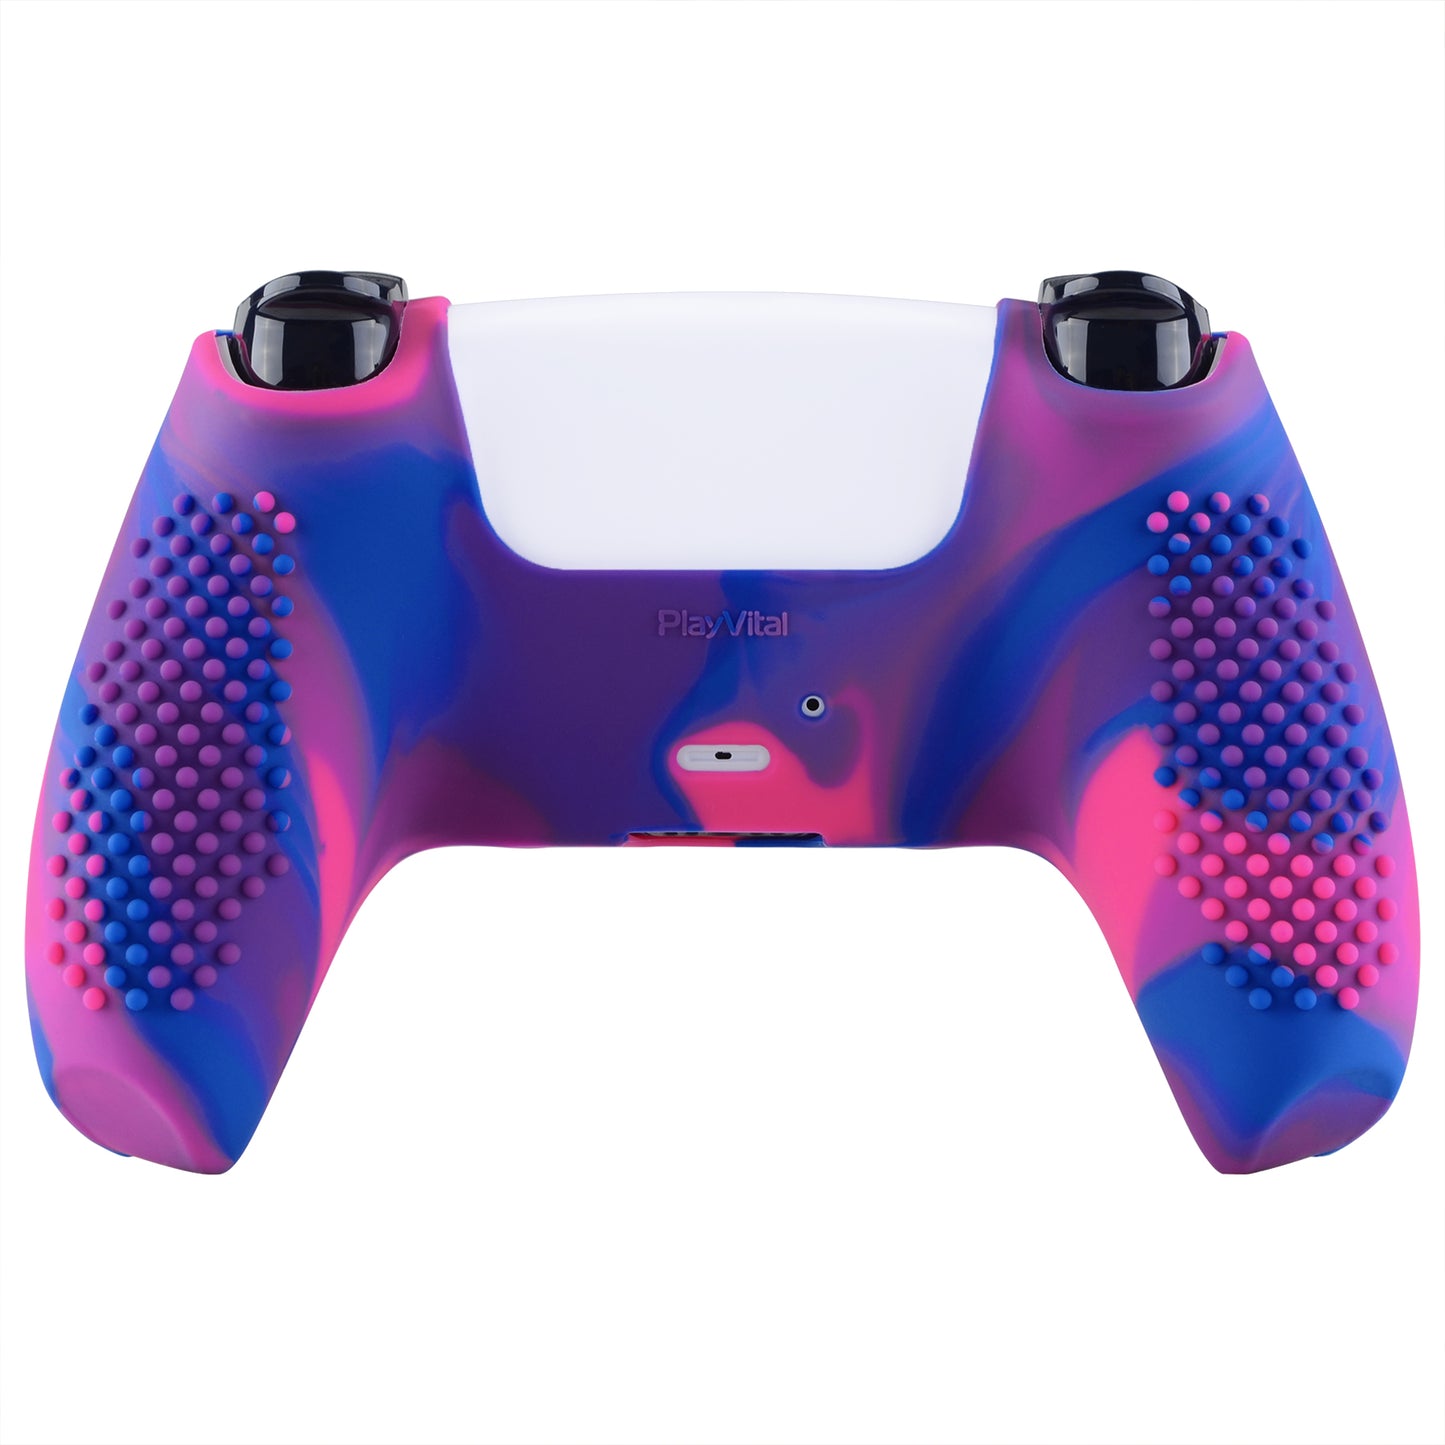 PlayVital 3D Studded Edition Anti-Slip Silicone Cover Skin with Thumb Grip Caps for PS5 Wireless Controller - Pink & Purple & Blue - TDPF021 PlayVital